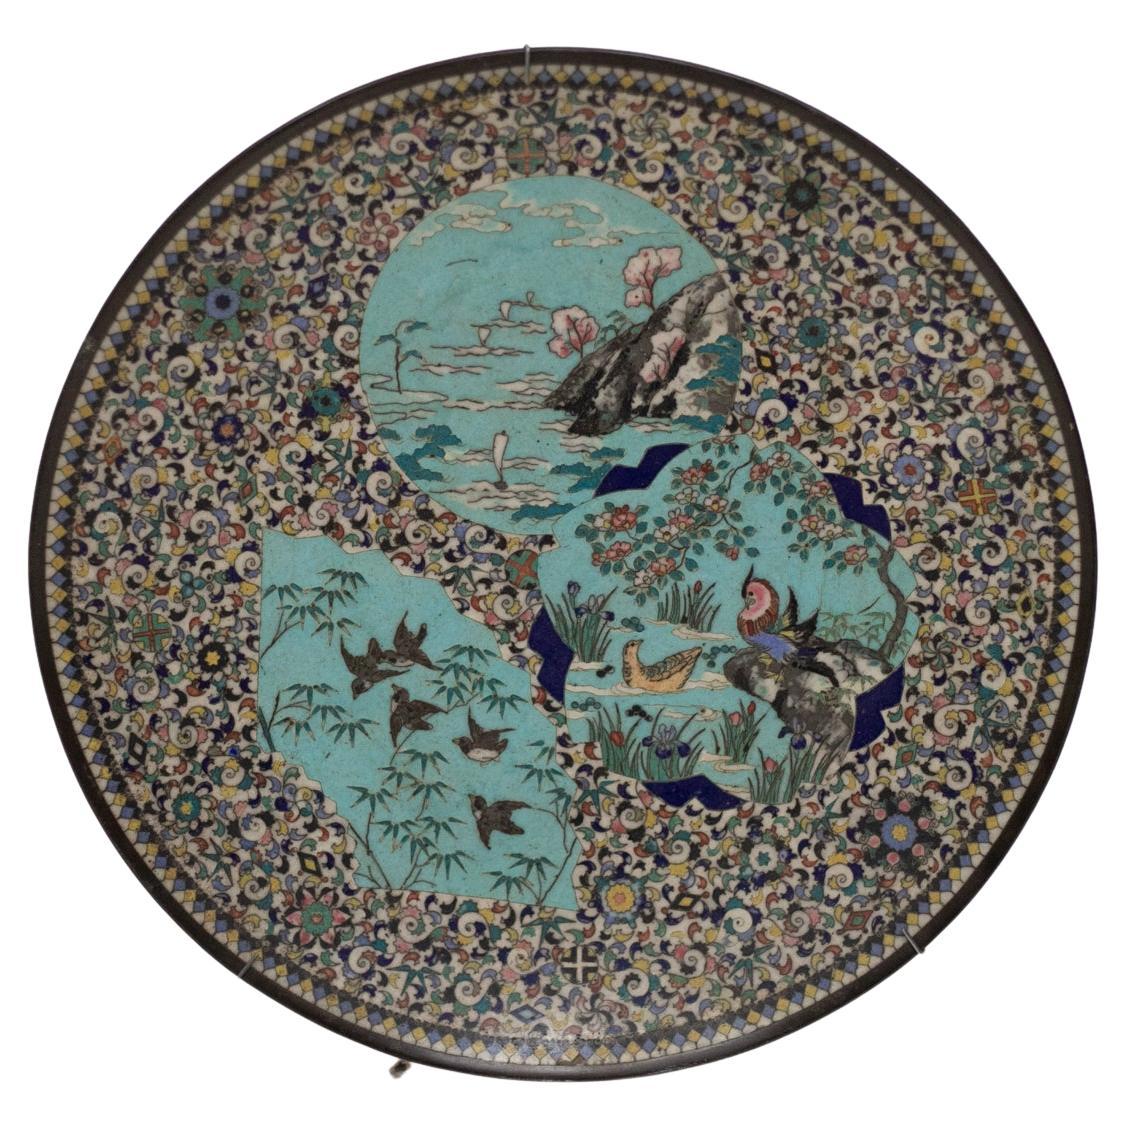 Chinese Decorative Plate with Three Scenes, Qing Dynasty